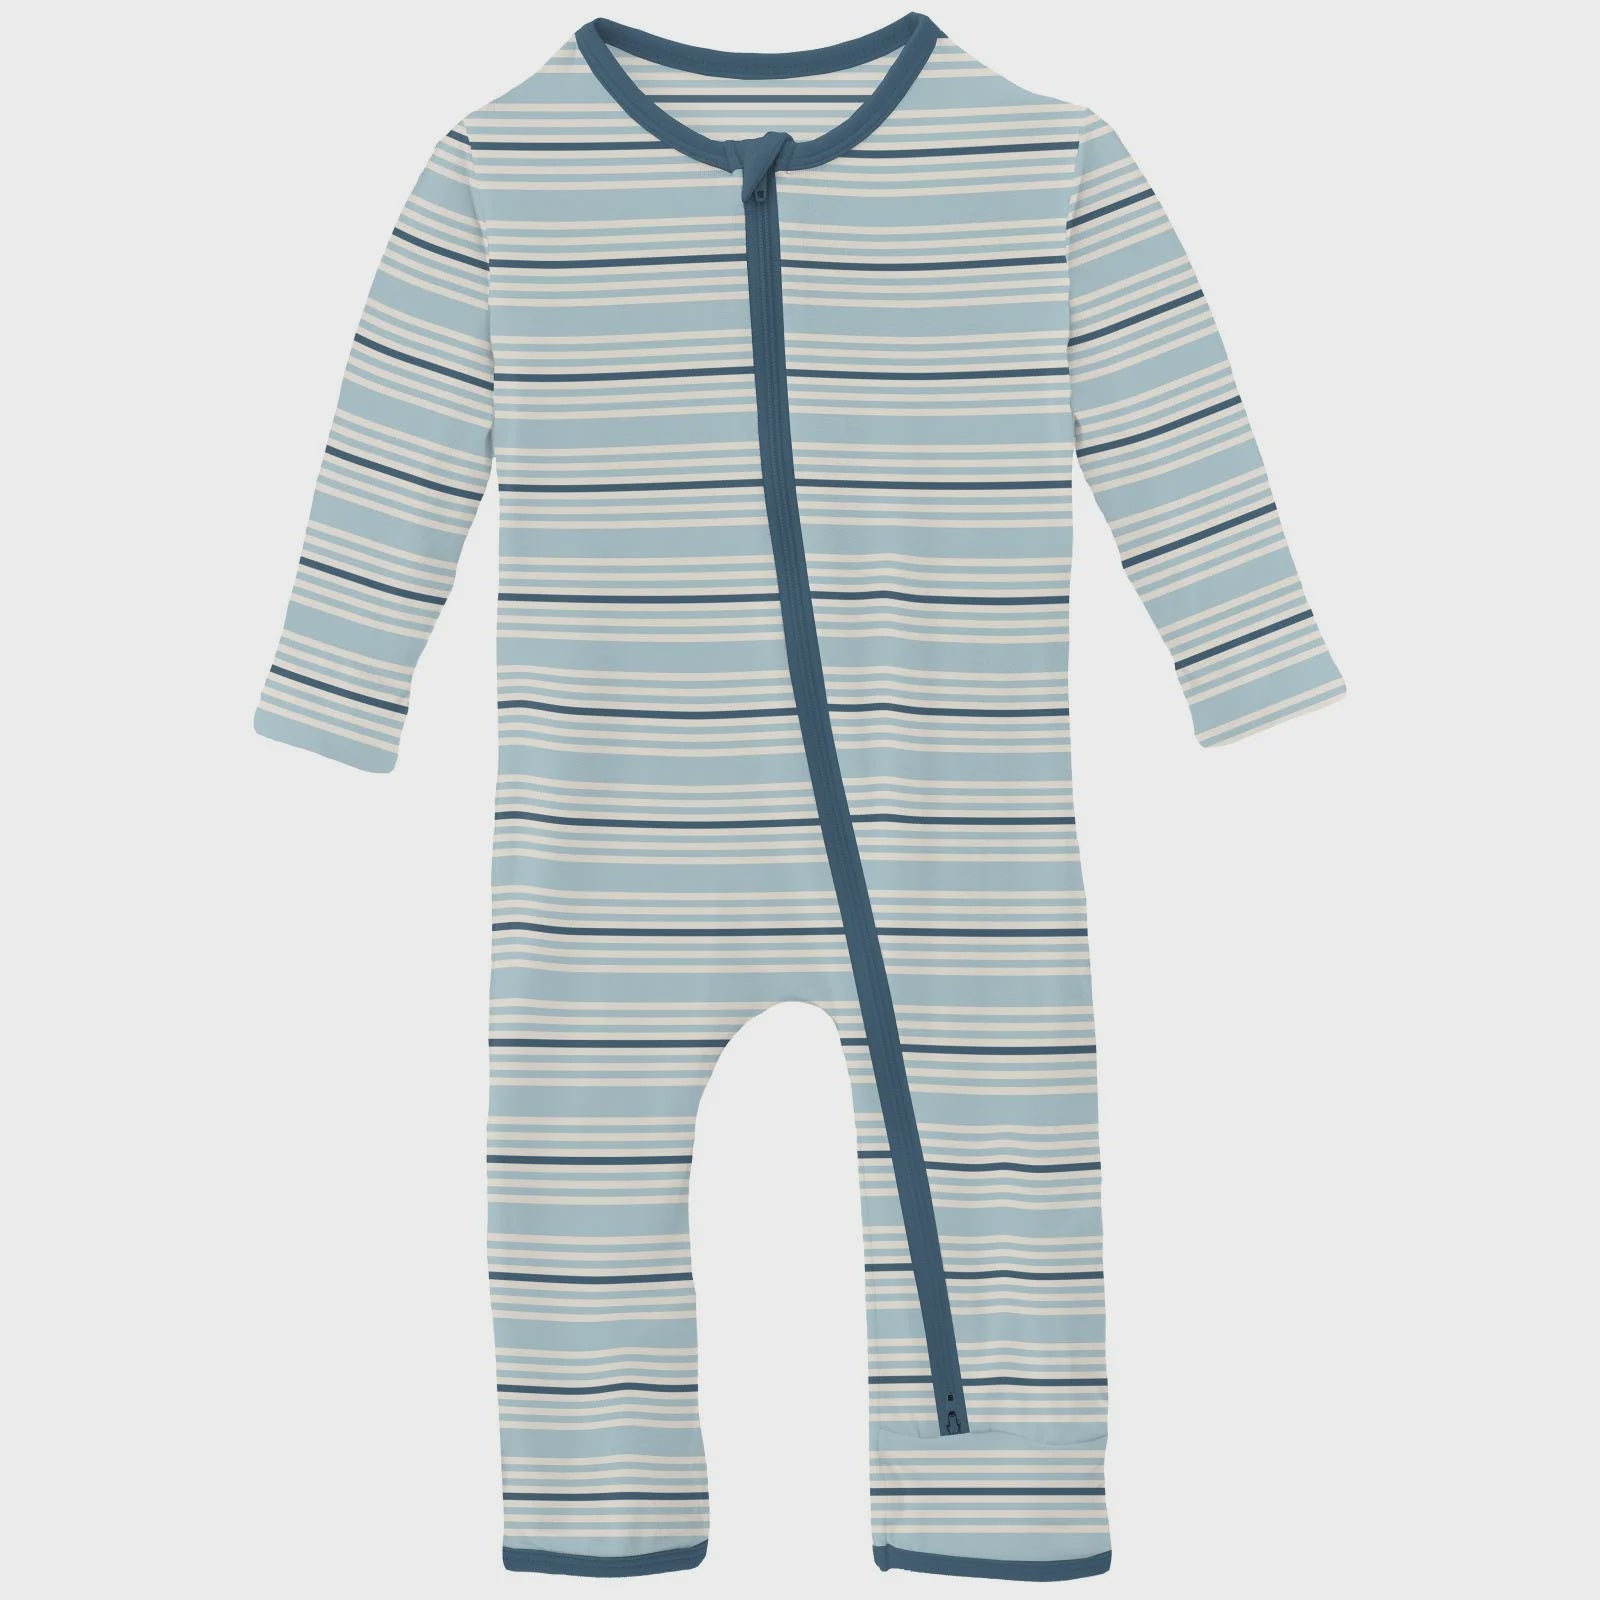 Jetsam Stripe Coverall with 2 Way Zipper